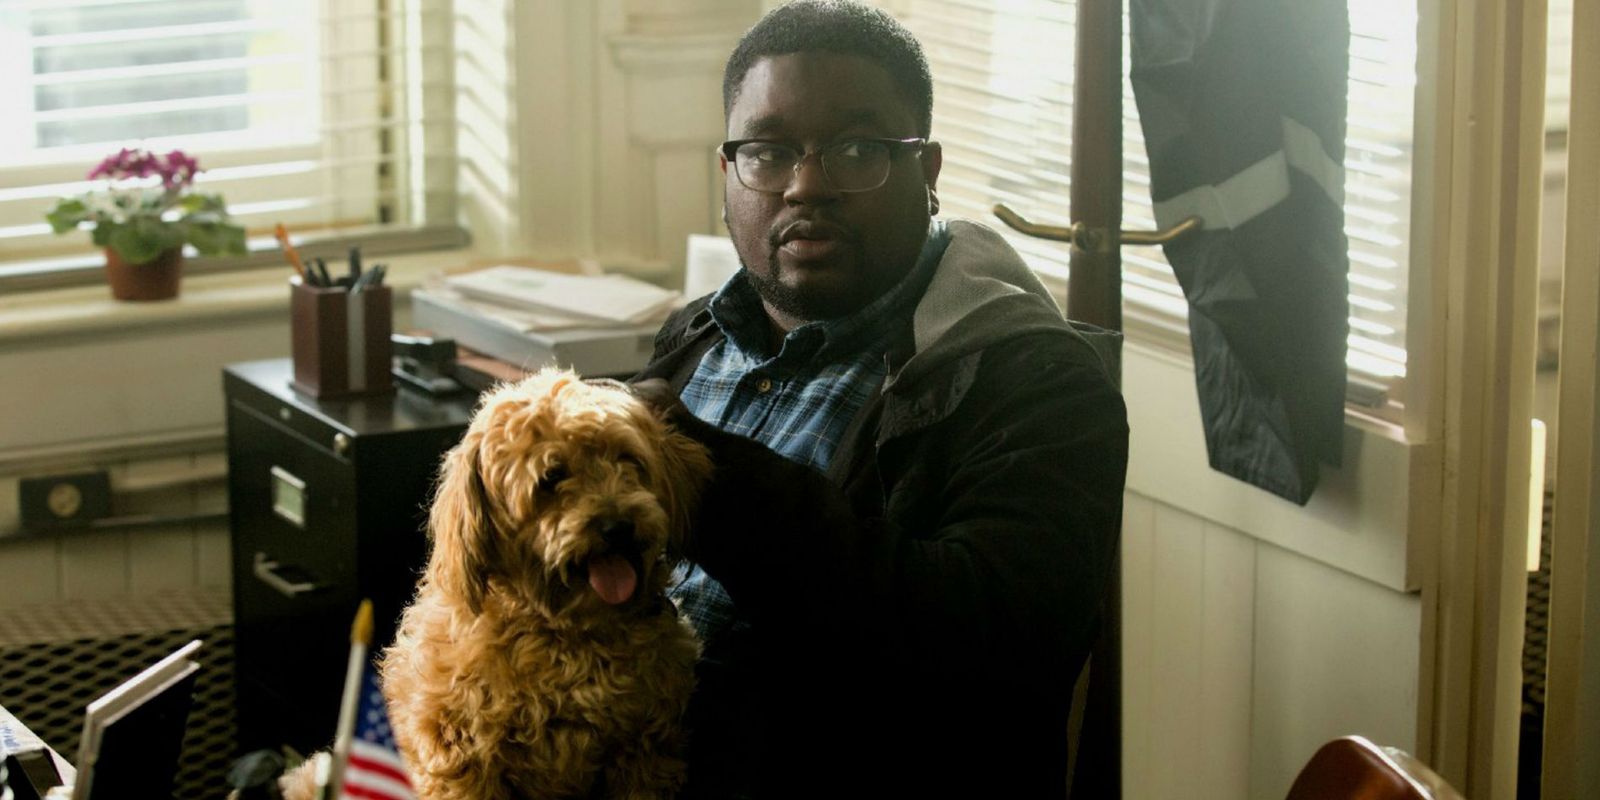 Rod holding a dog in Get Out